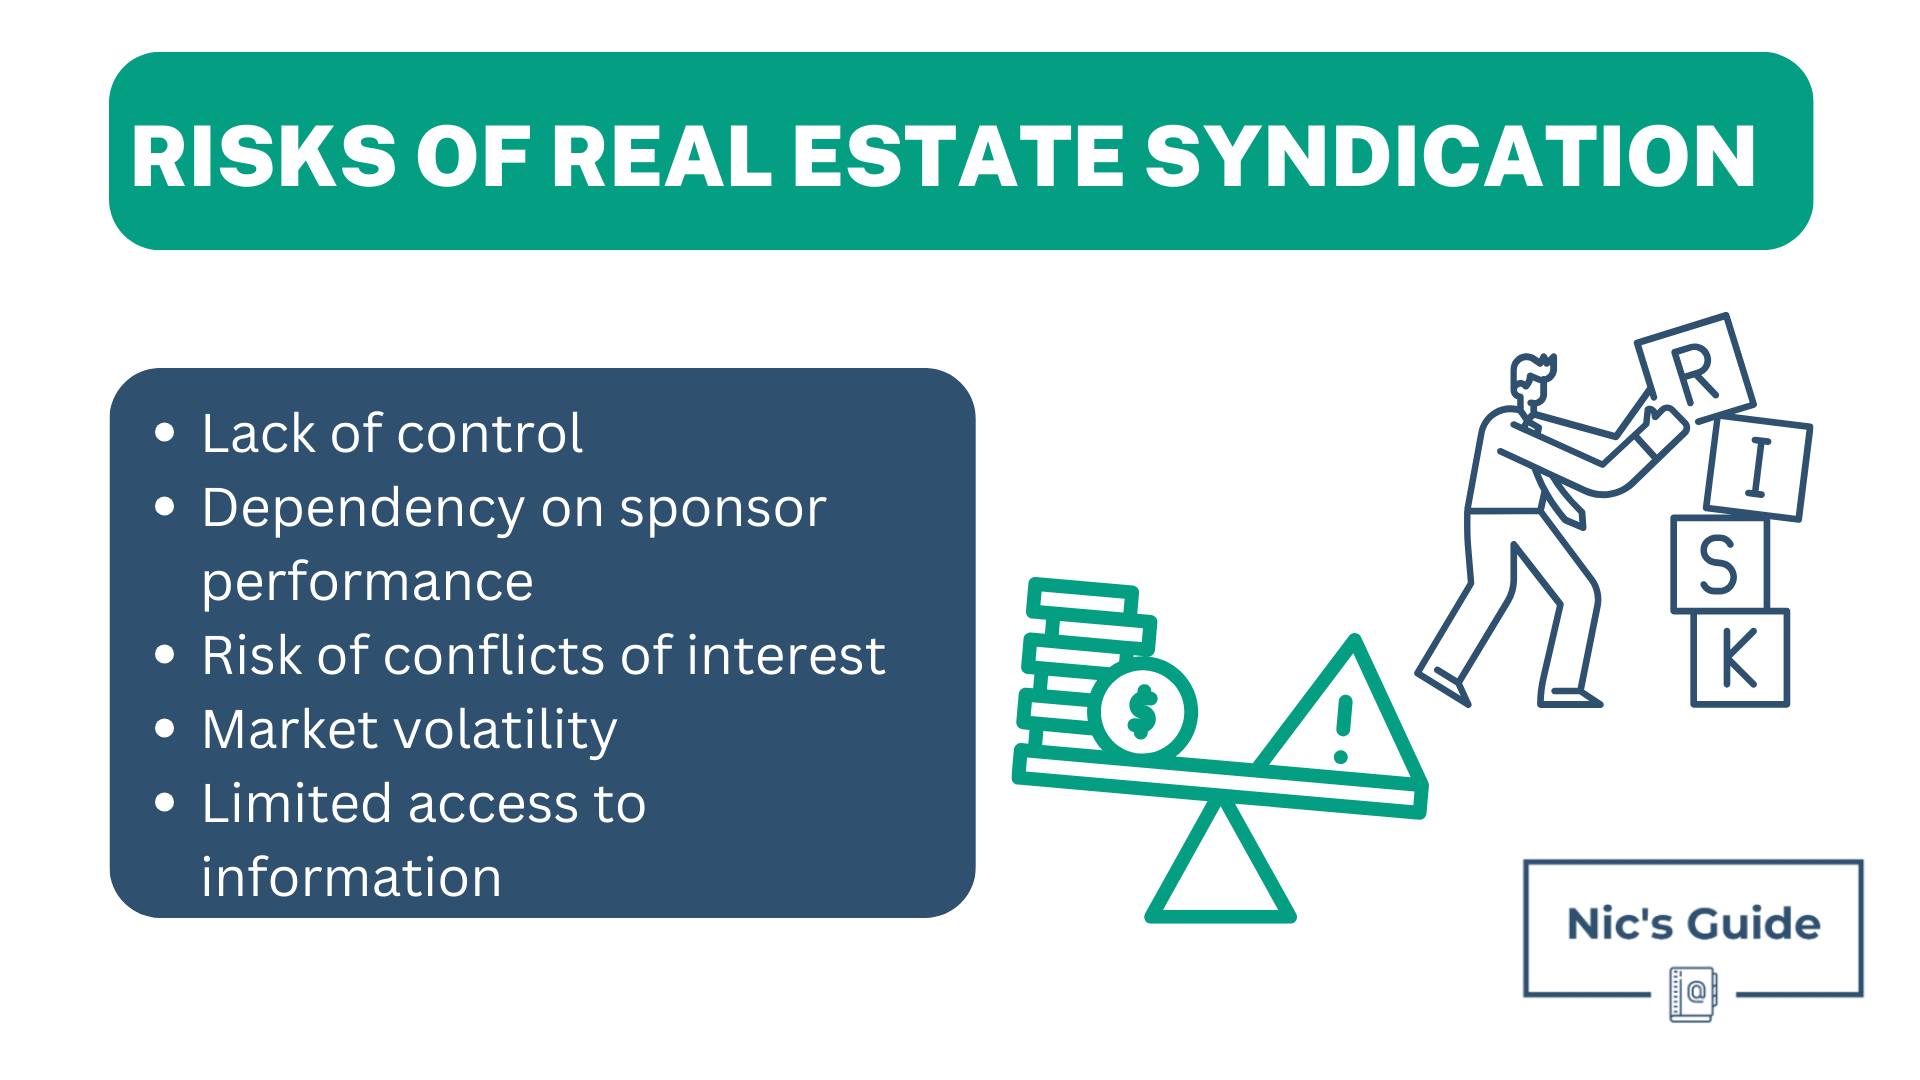 Risks of real estate syndications